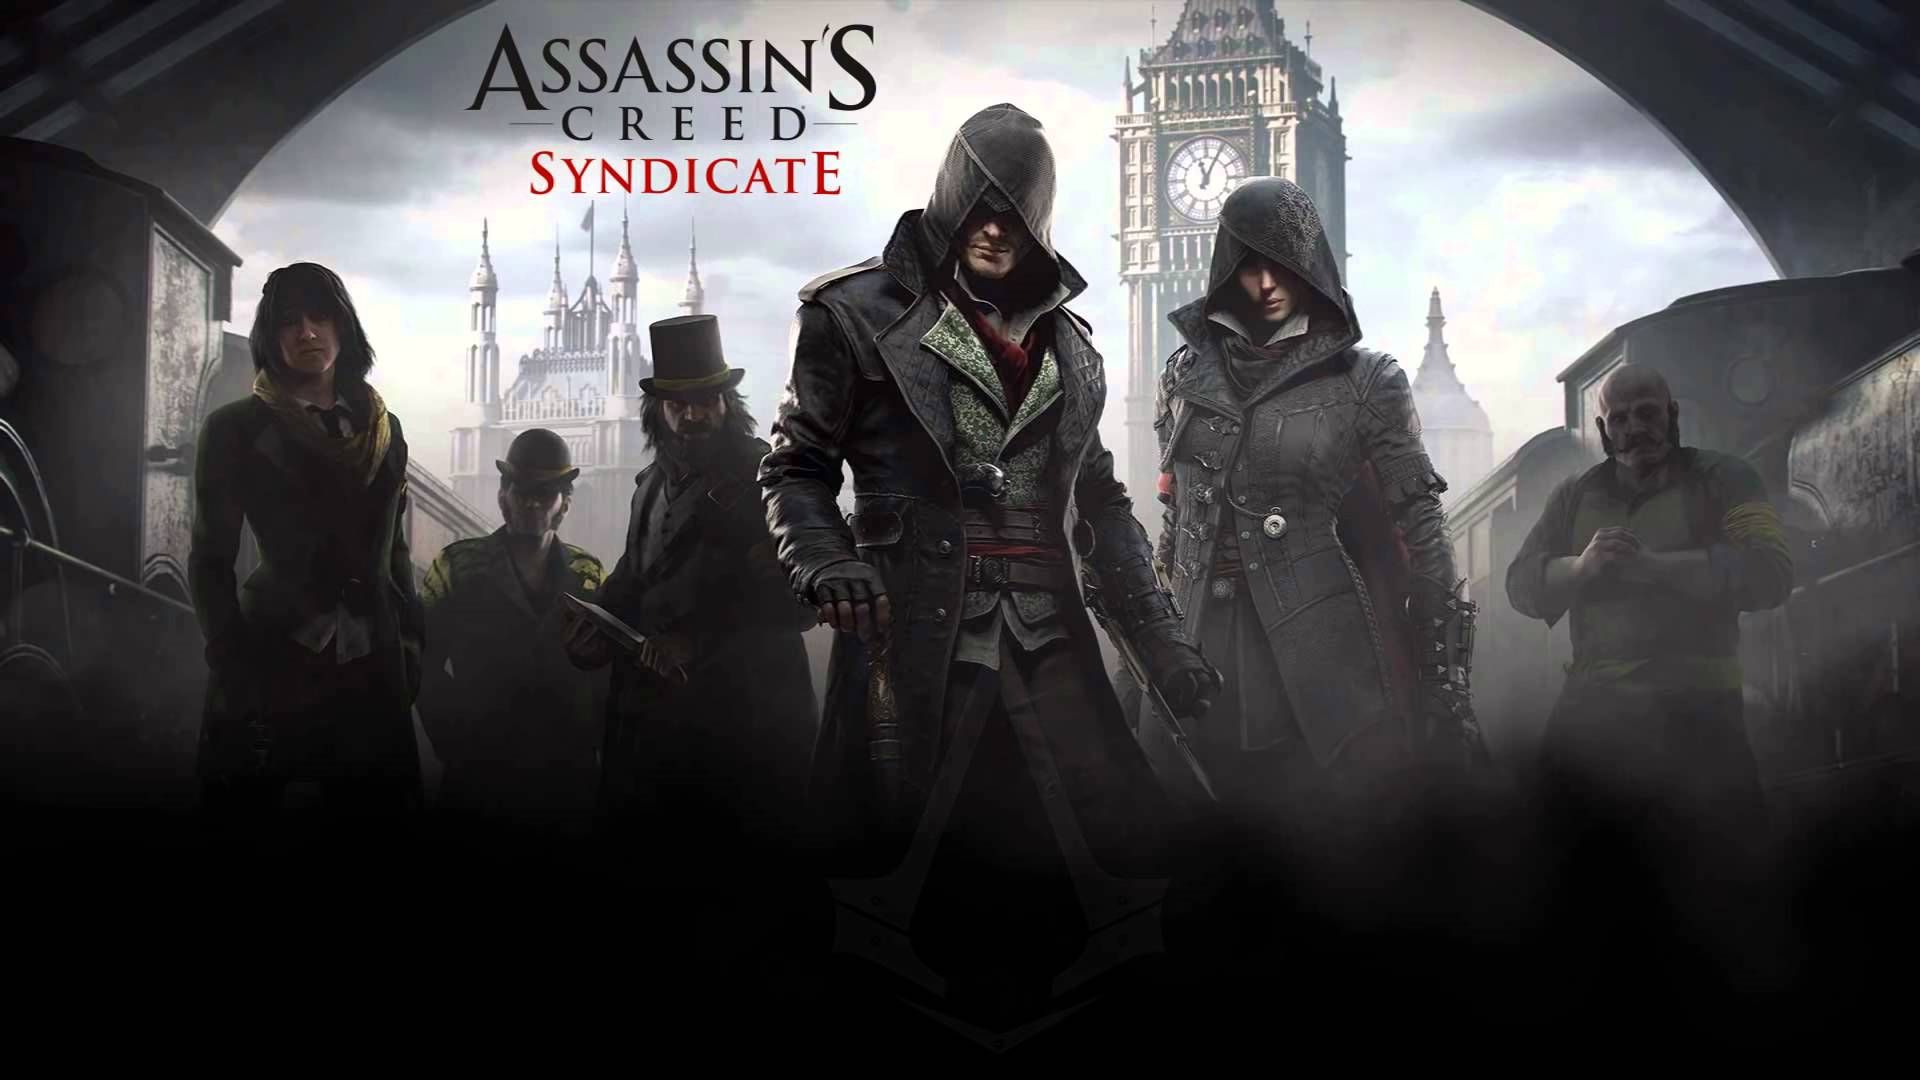 Assassin's Creed Syndicate Soundtrack OST Main Theme Family. Assassins creed syndicate, Assassins creed, Assassin's creed